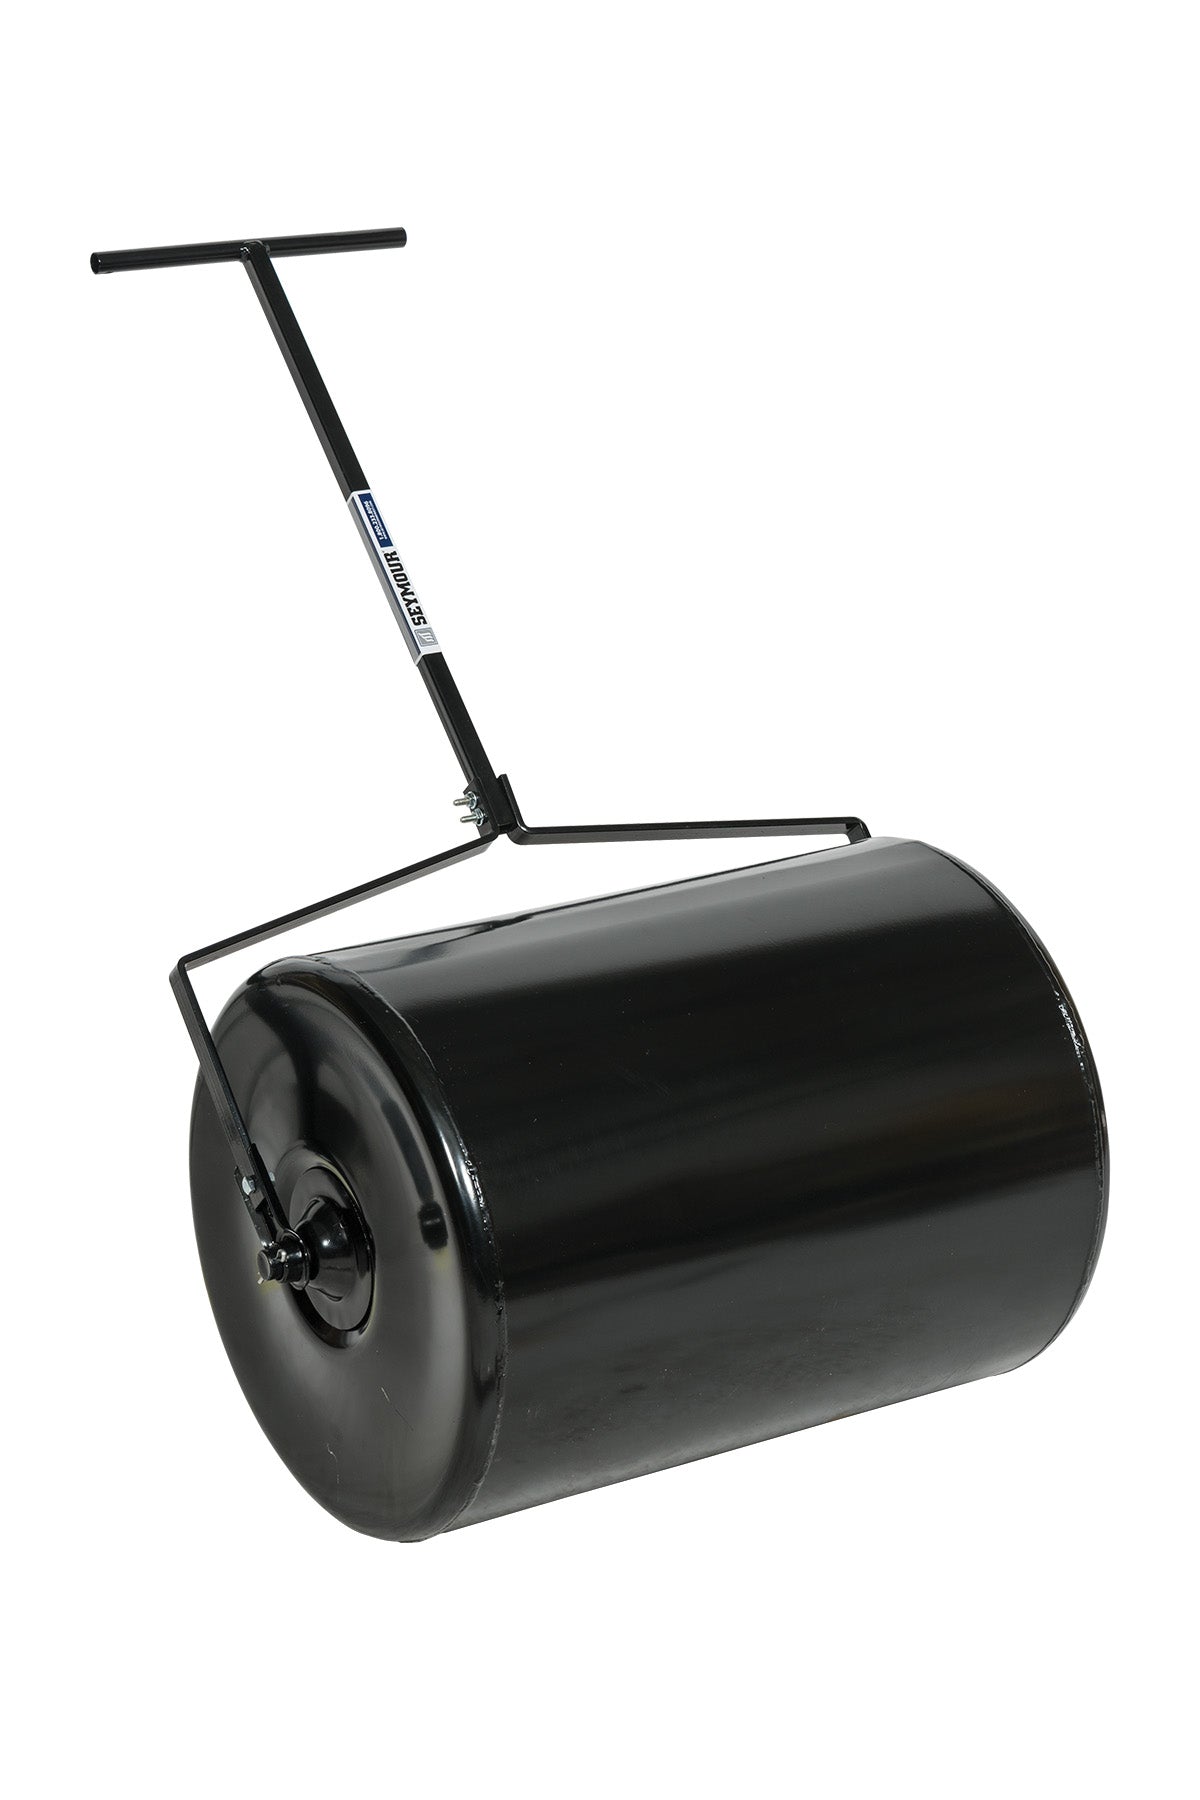 buy lawn rollers at cheap rate in bulk. wholesale & retail lawn & gardening tools & supply store.